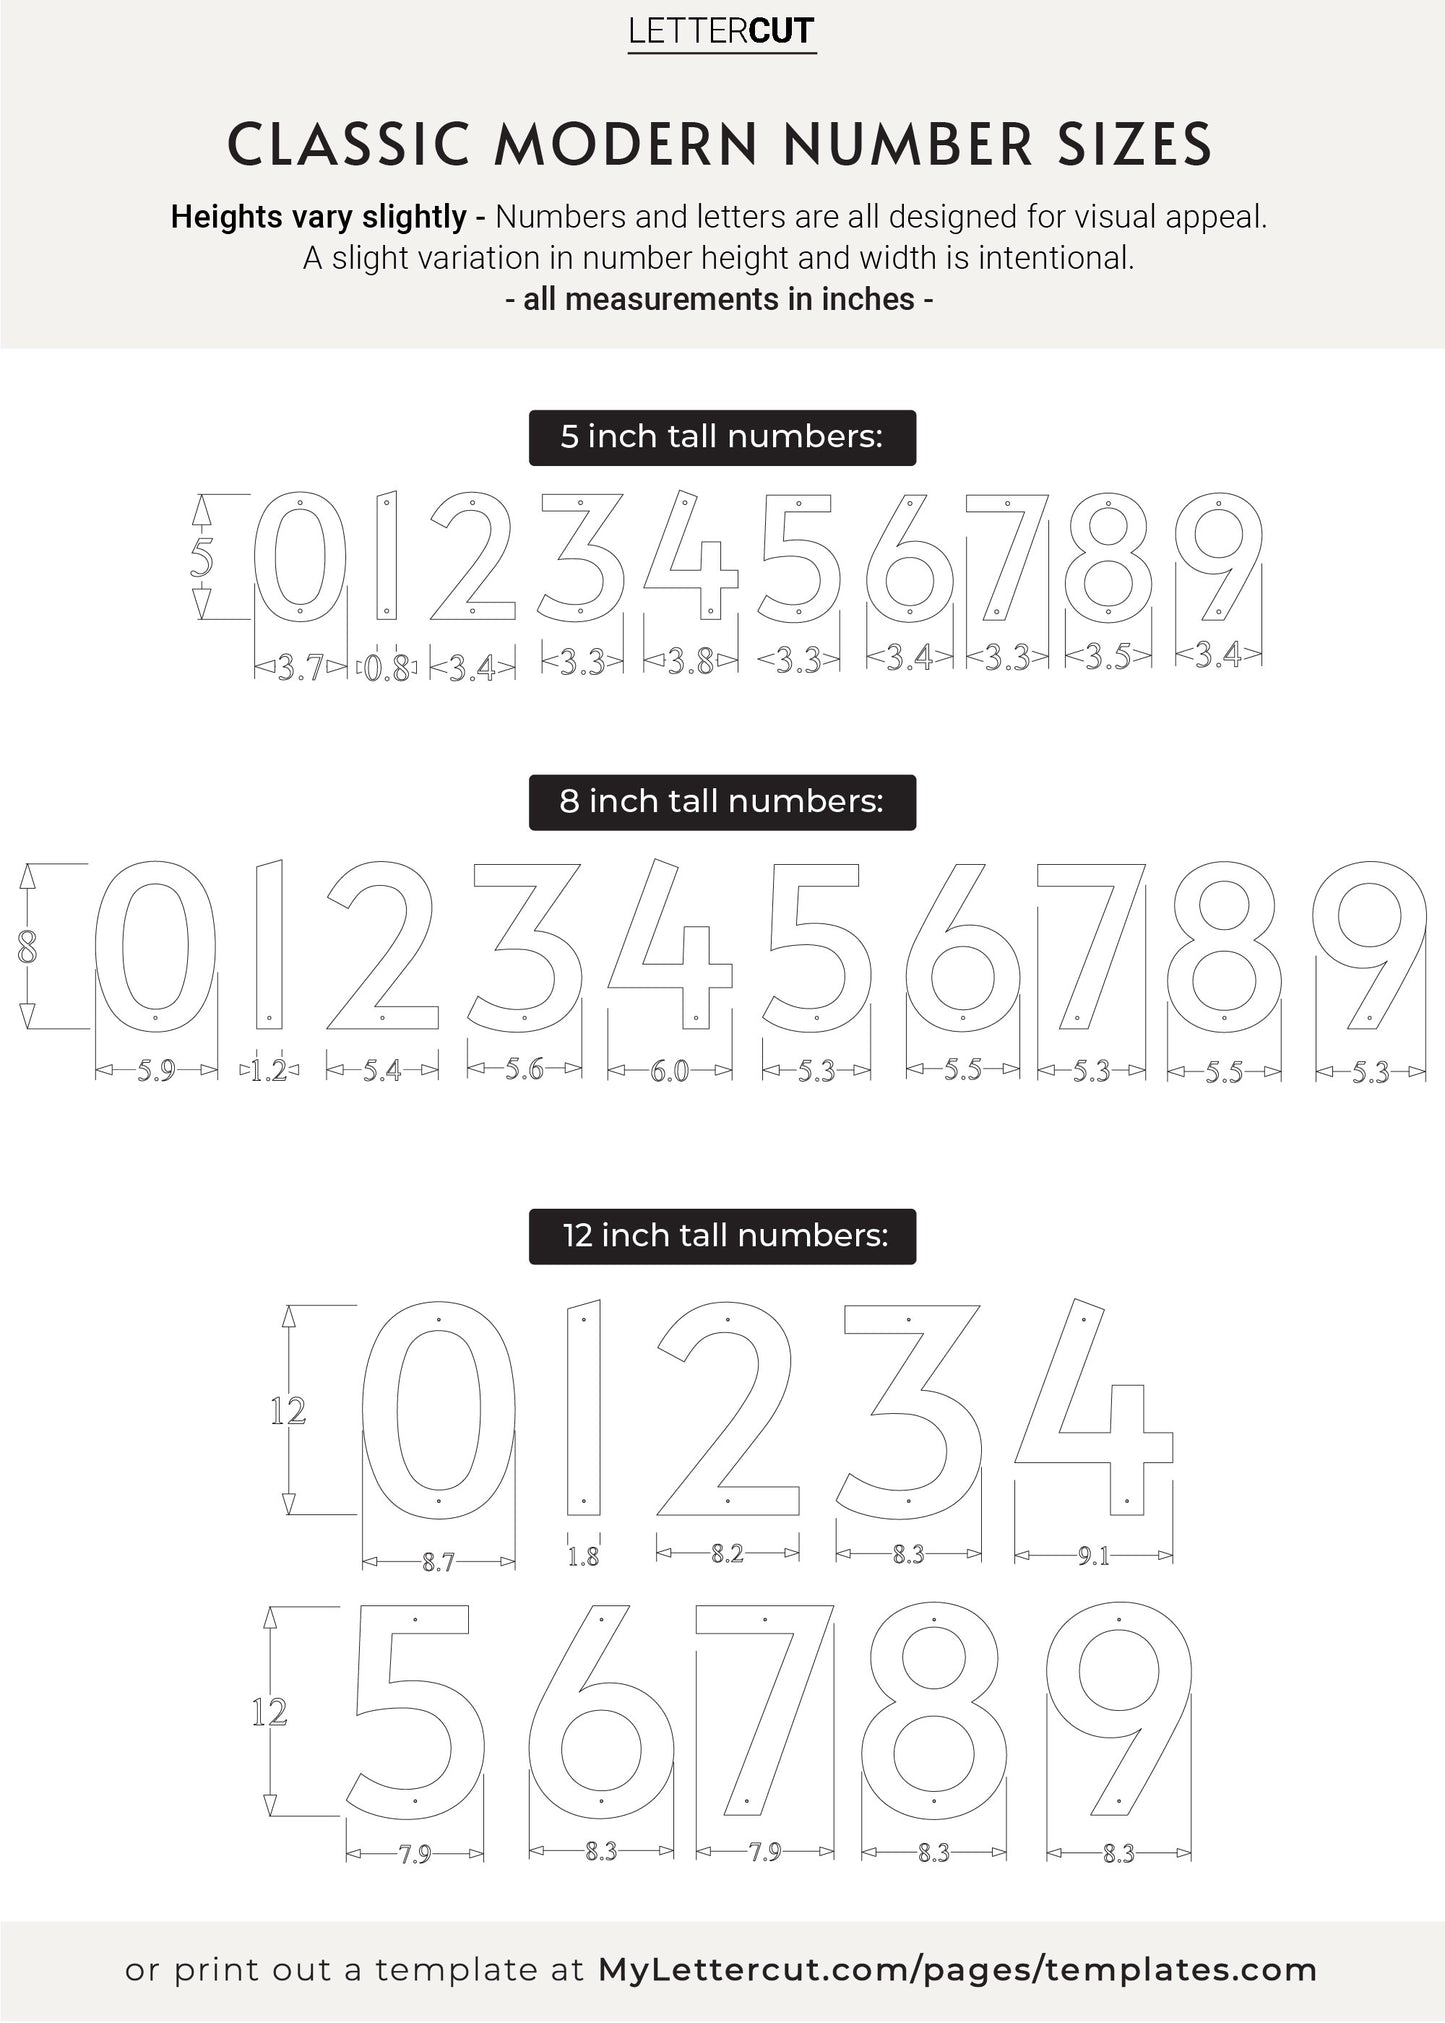 CLASSIC MODERN house number sizes and measurements